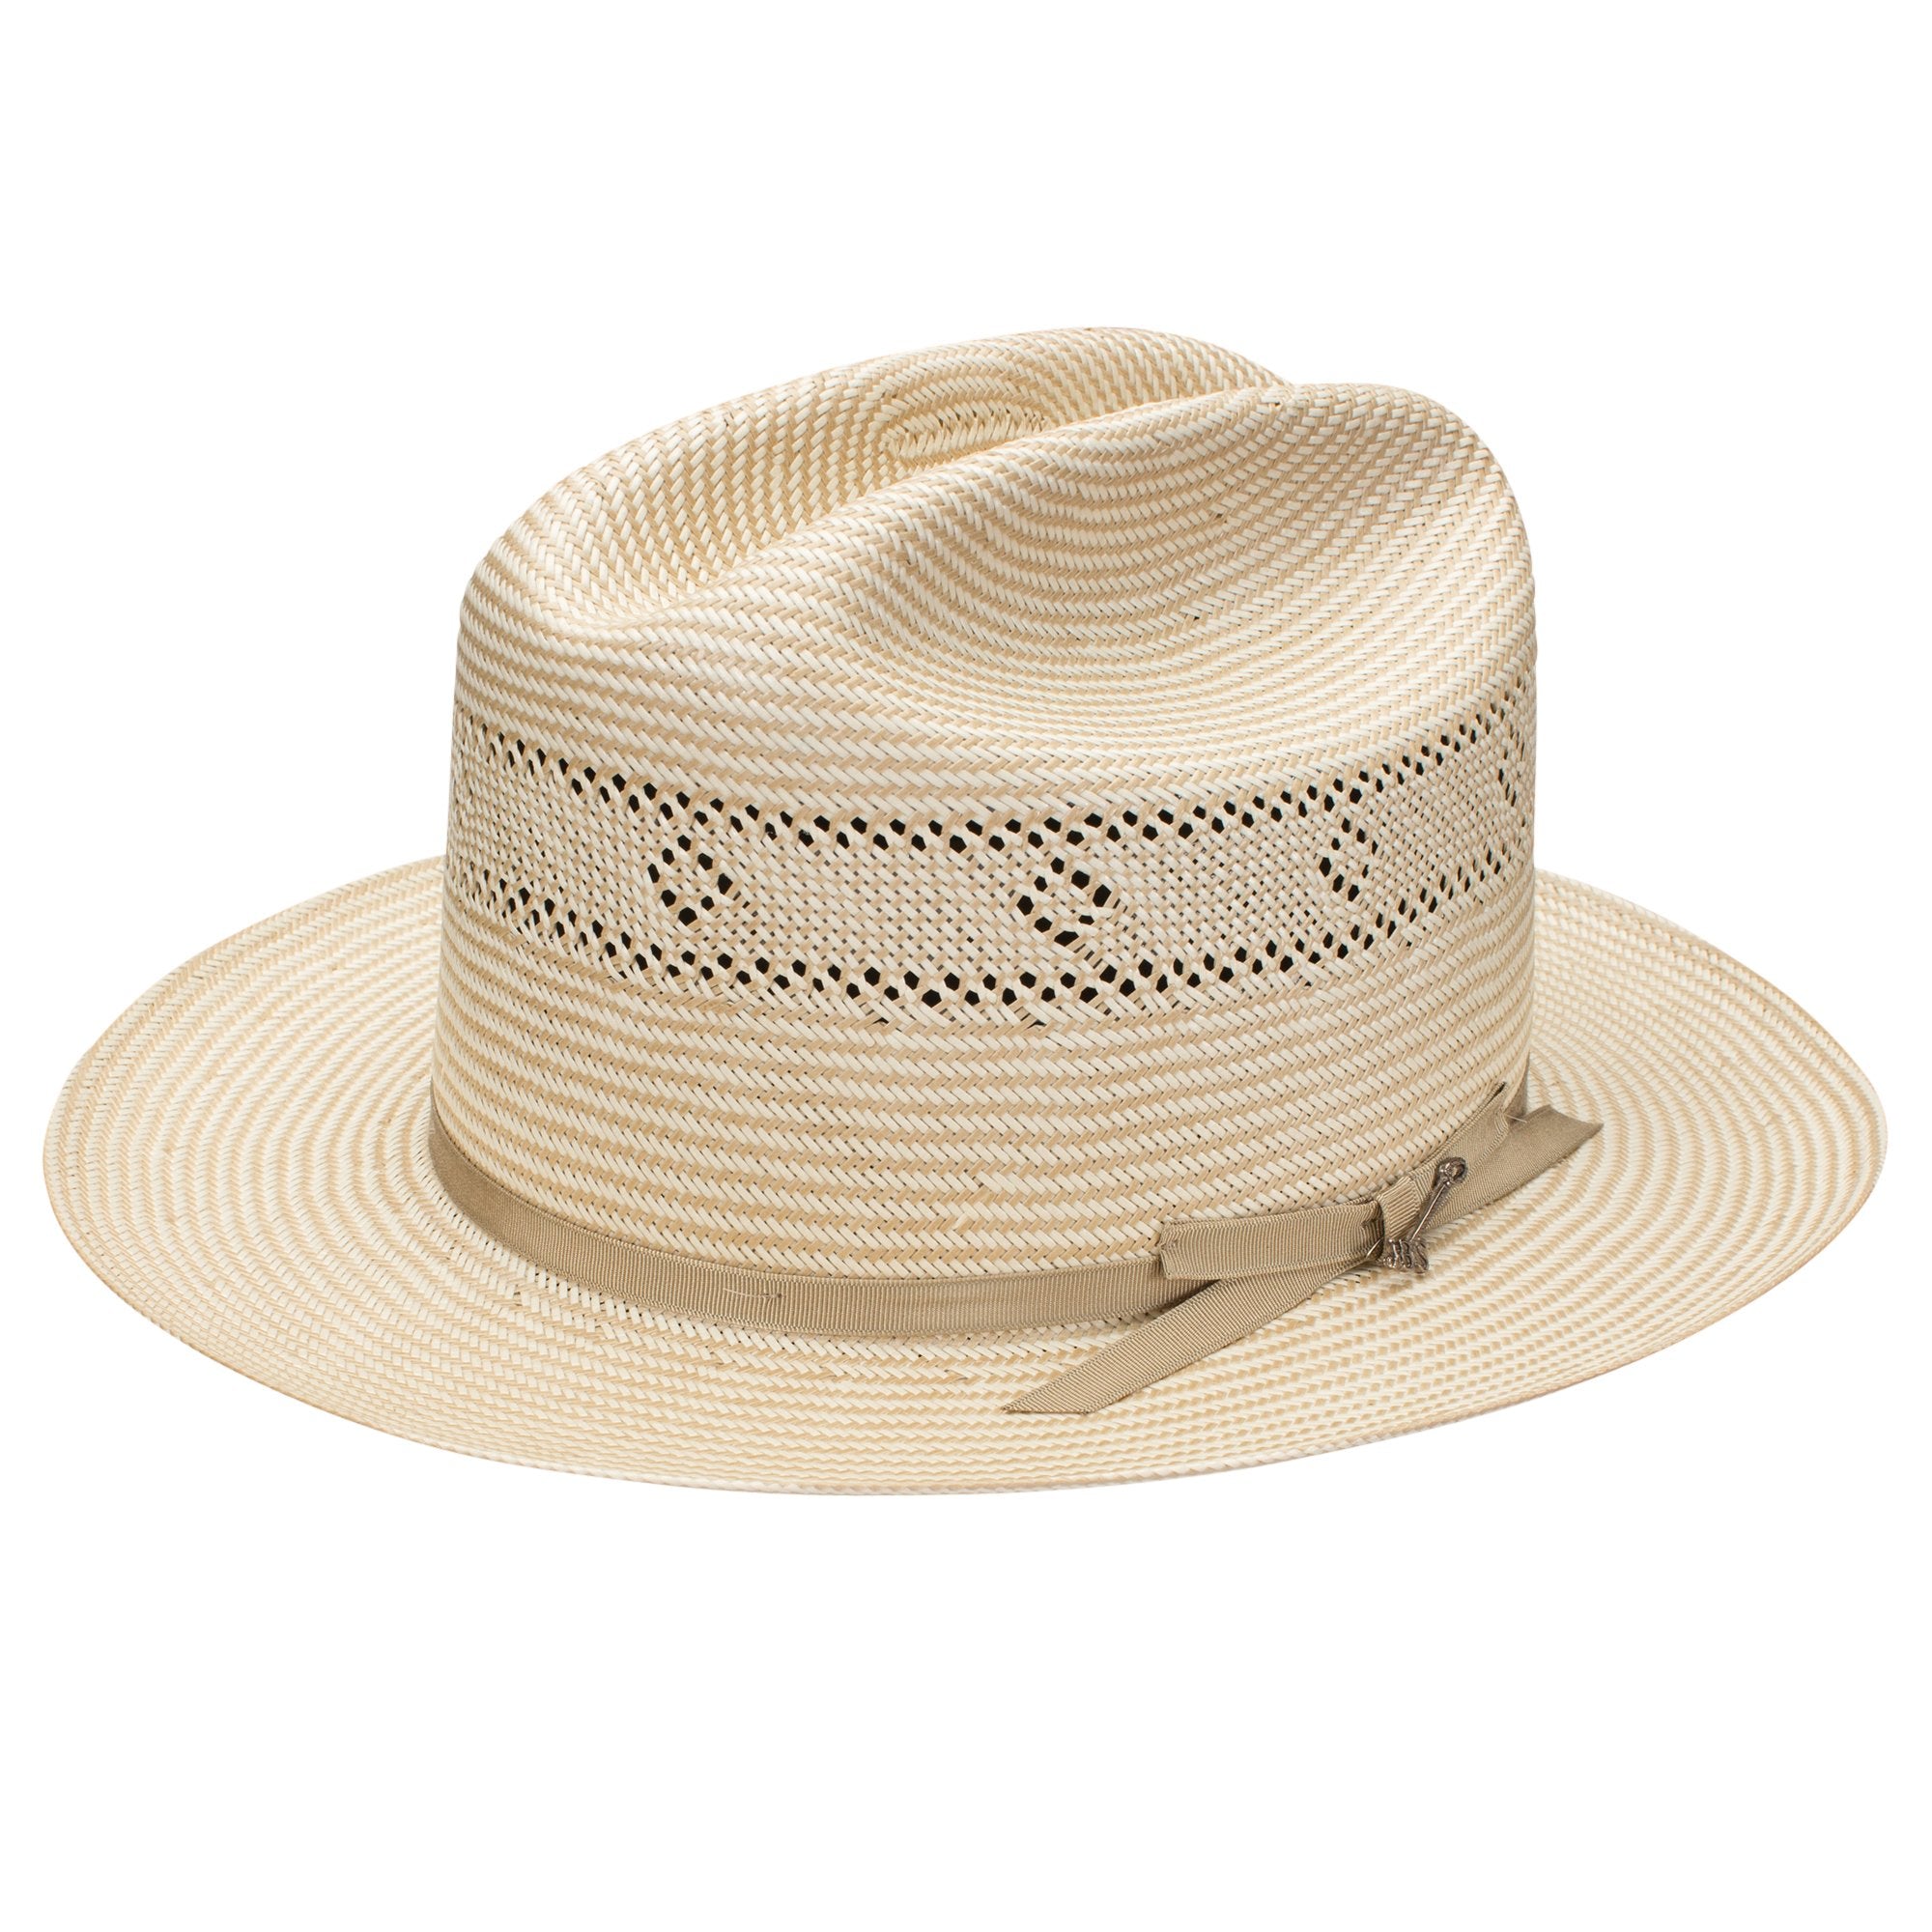 Stetson - Open Road 2 - Vented Straw Hat